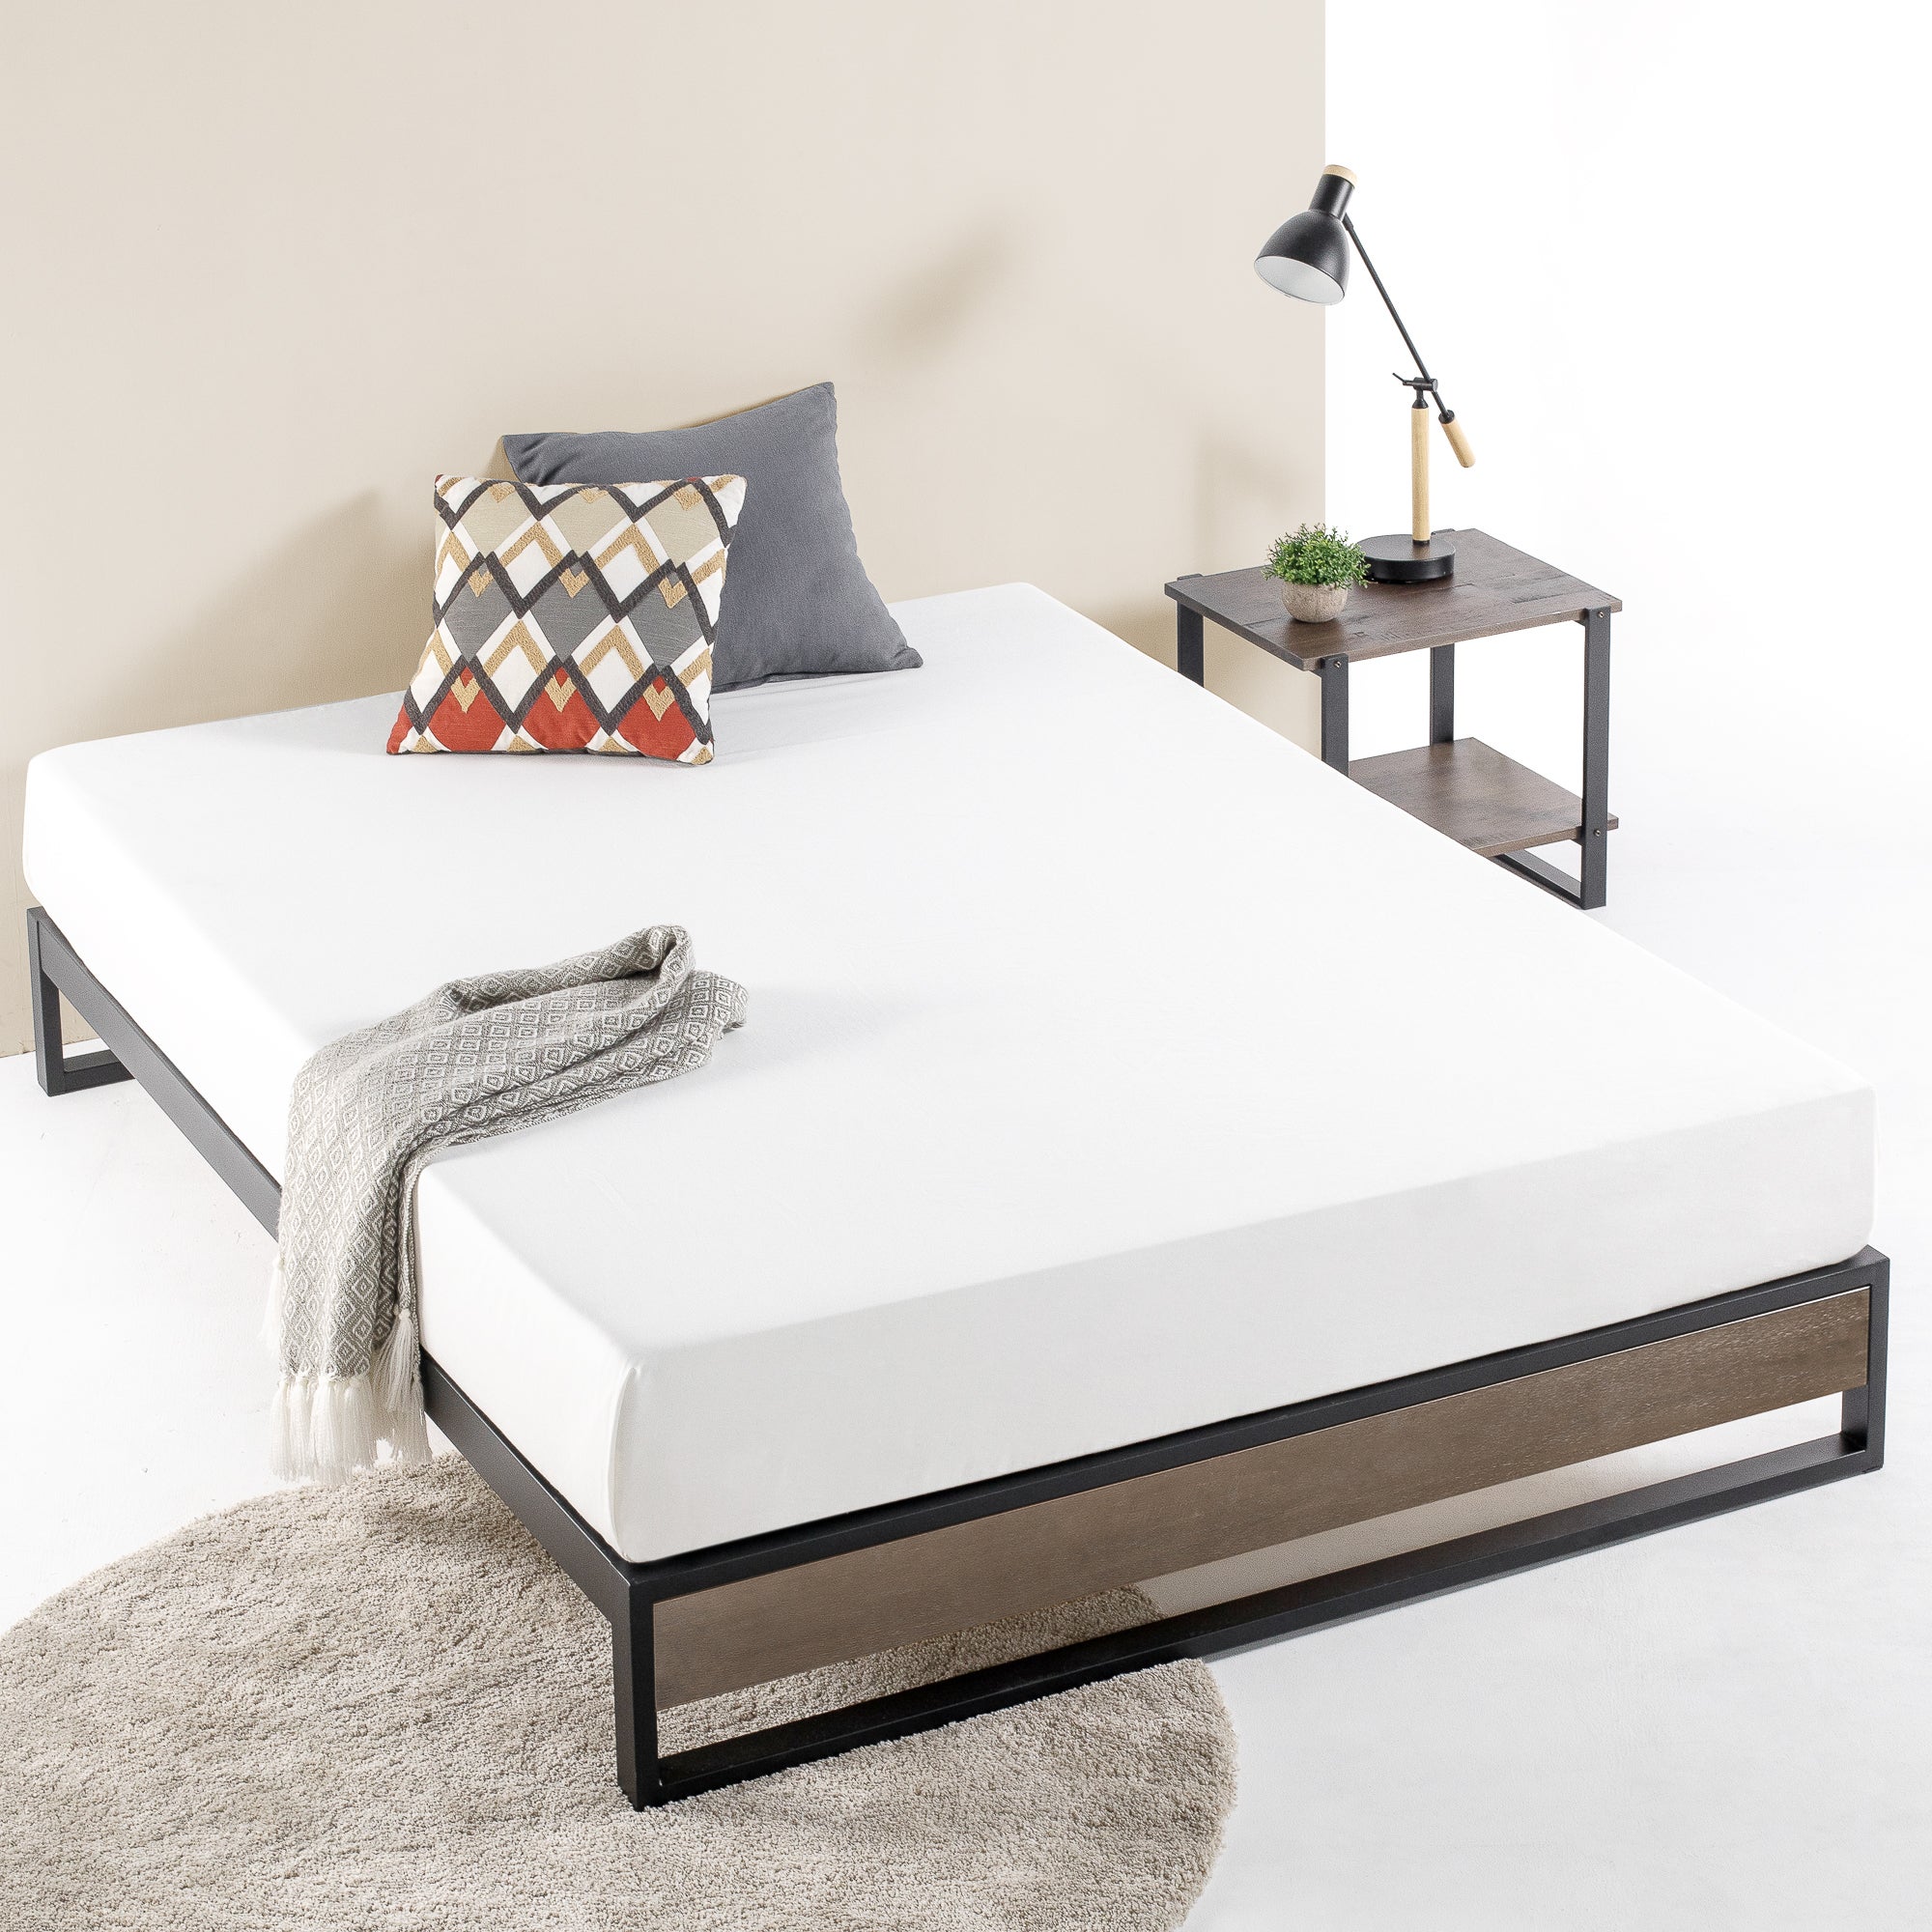 Zinus Suzanne 25cm Grey Industrial Bed Base Frame Steel And Pine Wood Modern Double Queen Size 